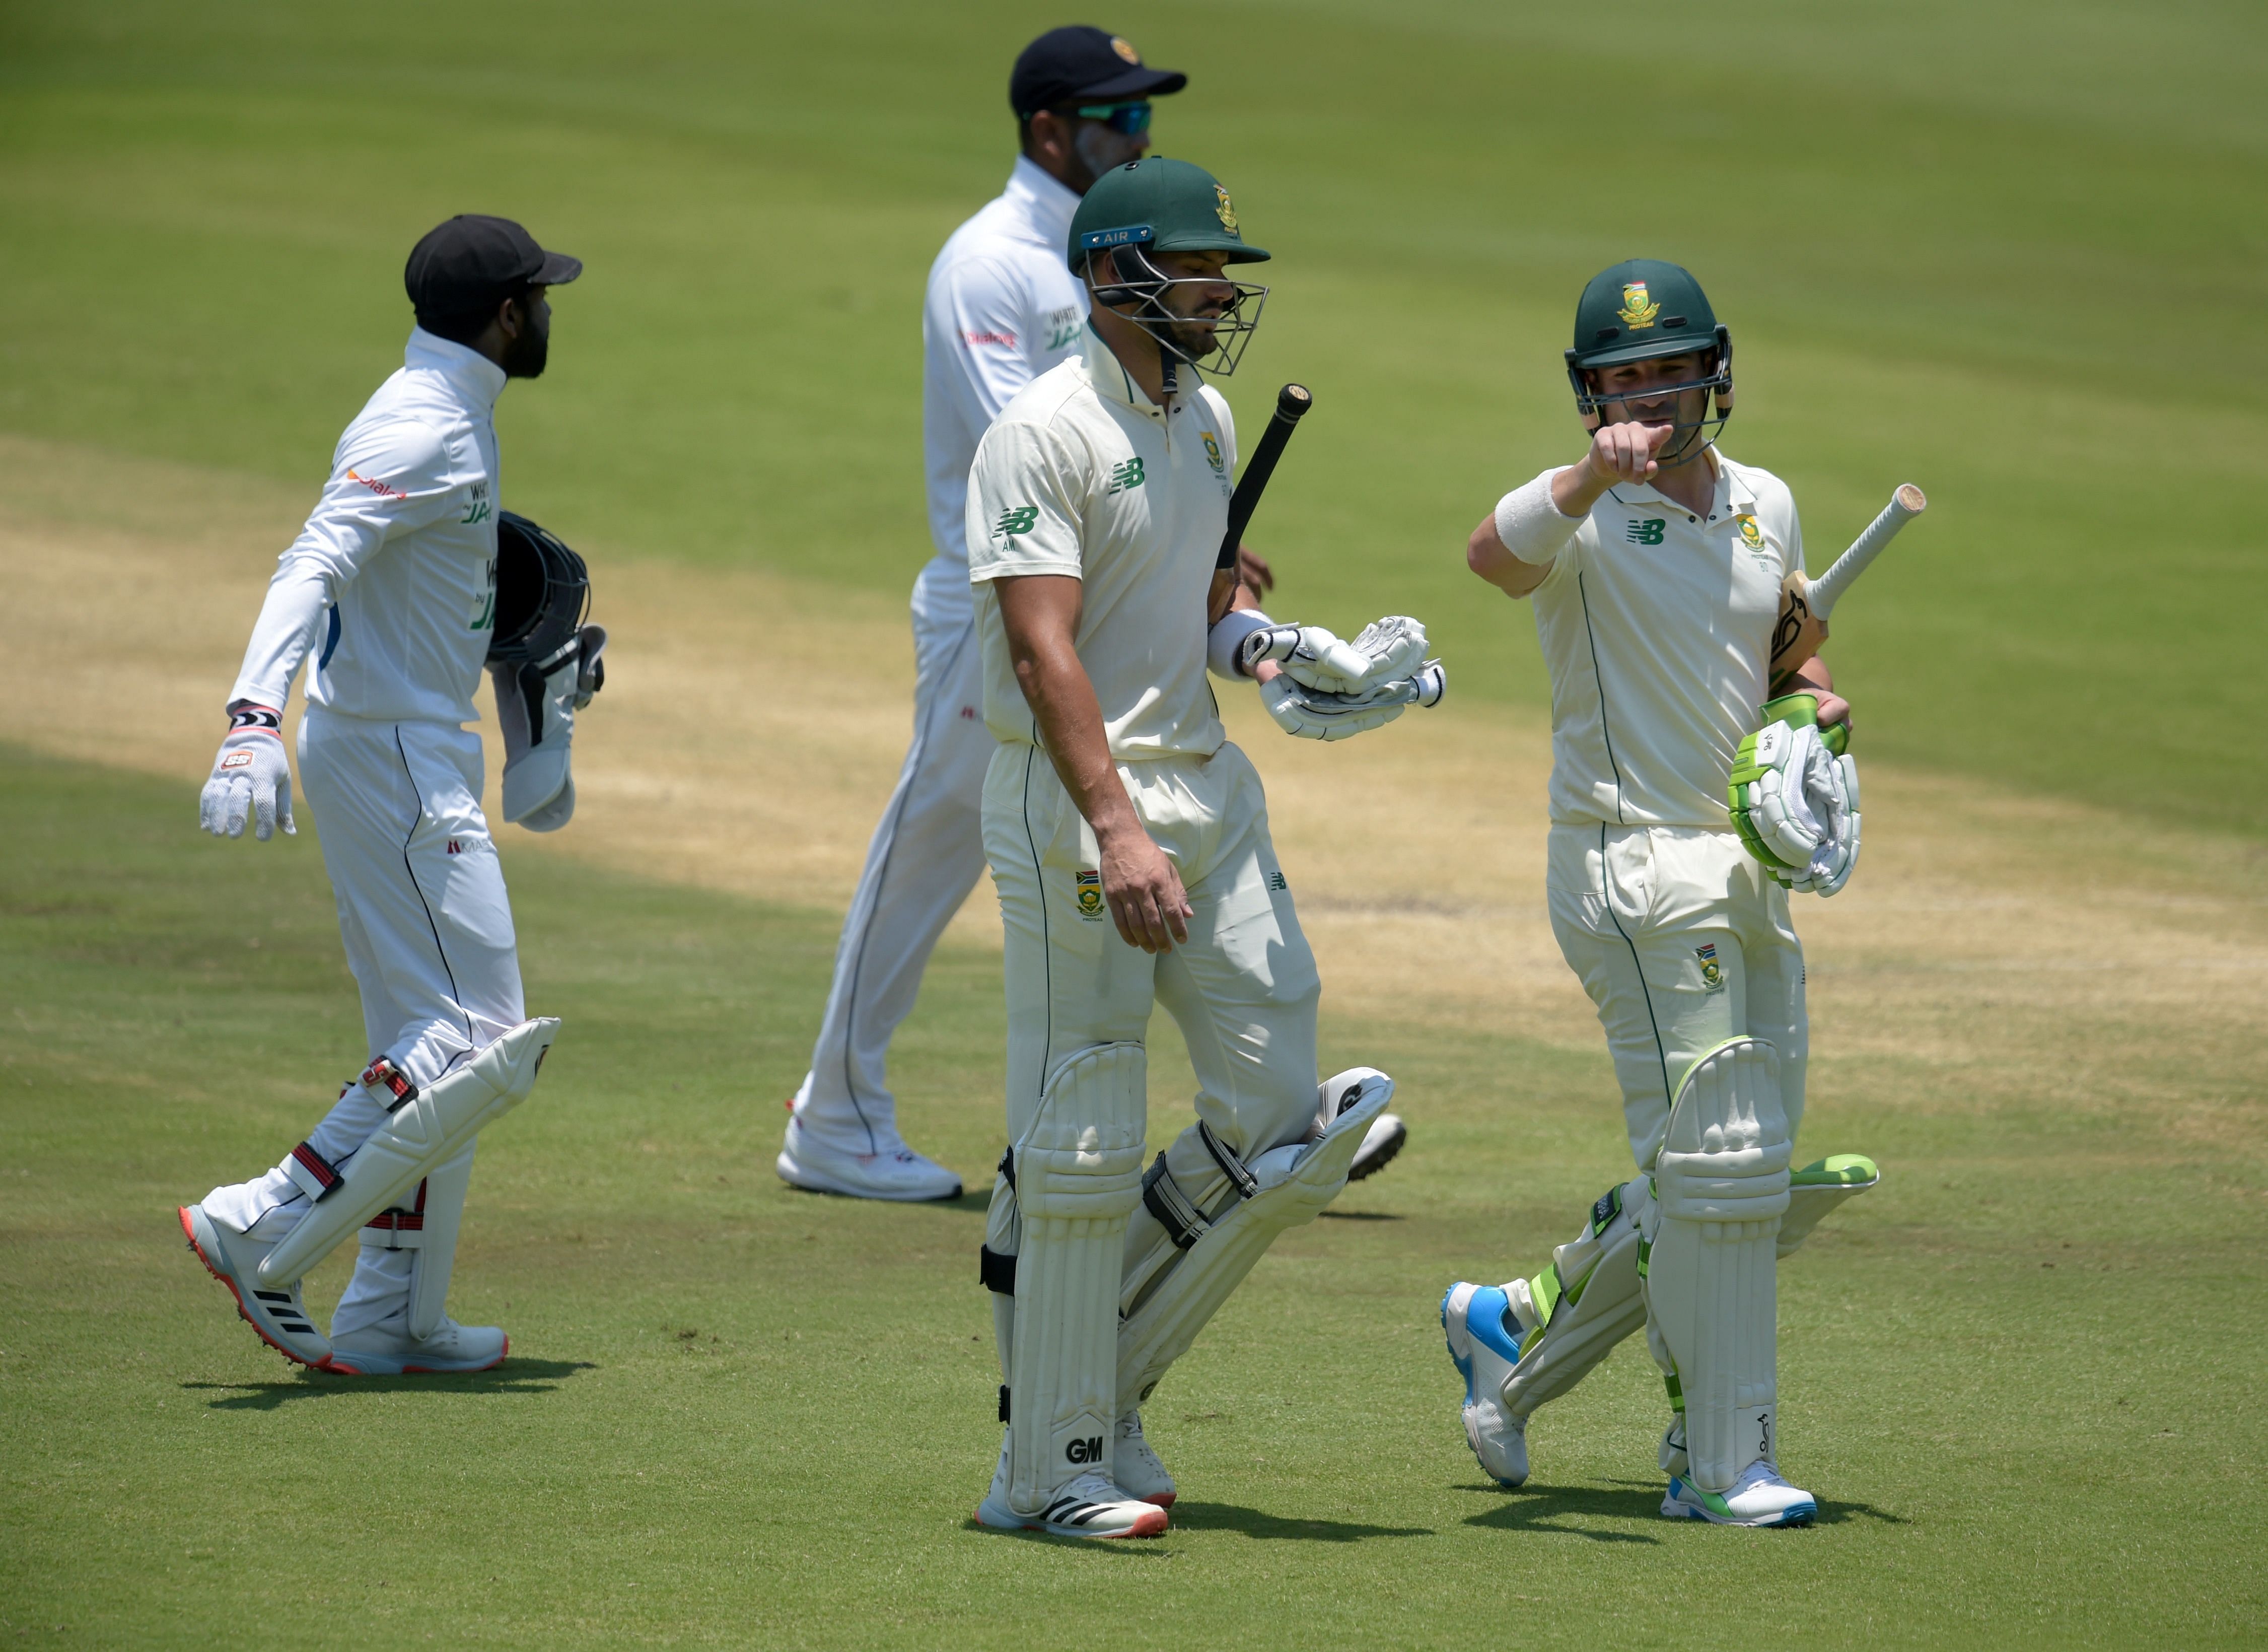 South Africa's Dean Elgar (R) speaks with opening batsman partner South Africa's Aiden Markram (C) as they walk off the field for lunch during the second day of the first Test cricket match between South Africa and Sri Lanka at SuperSport Park in Centurion on December 27, 2020. Credit: AFP Photo